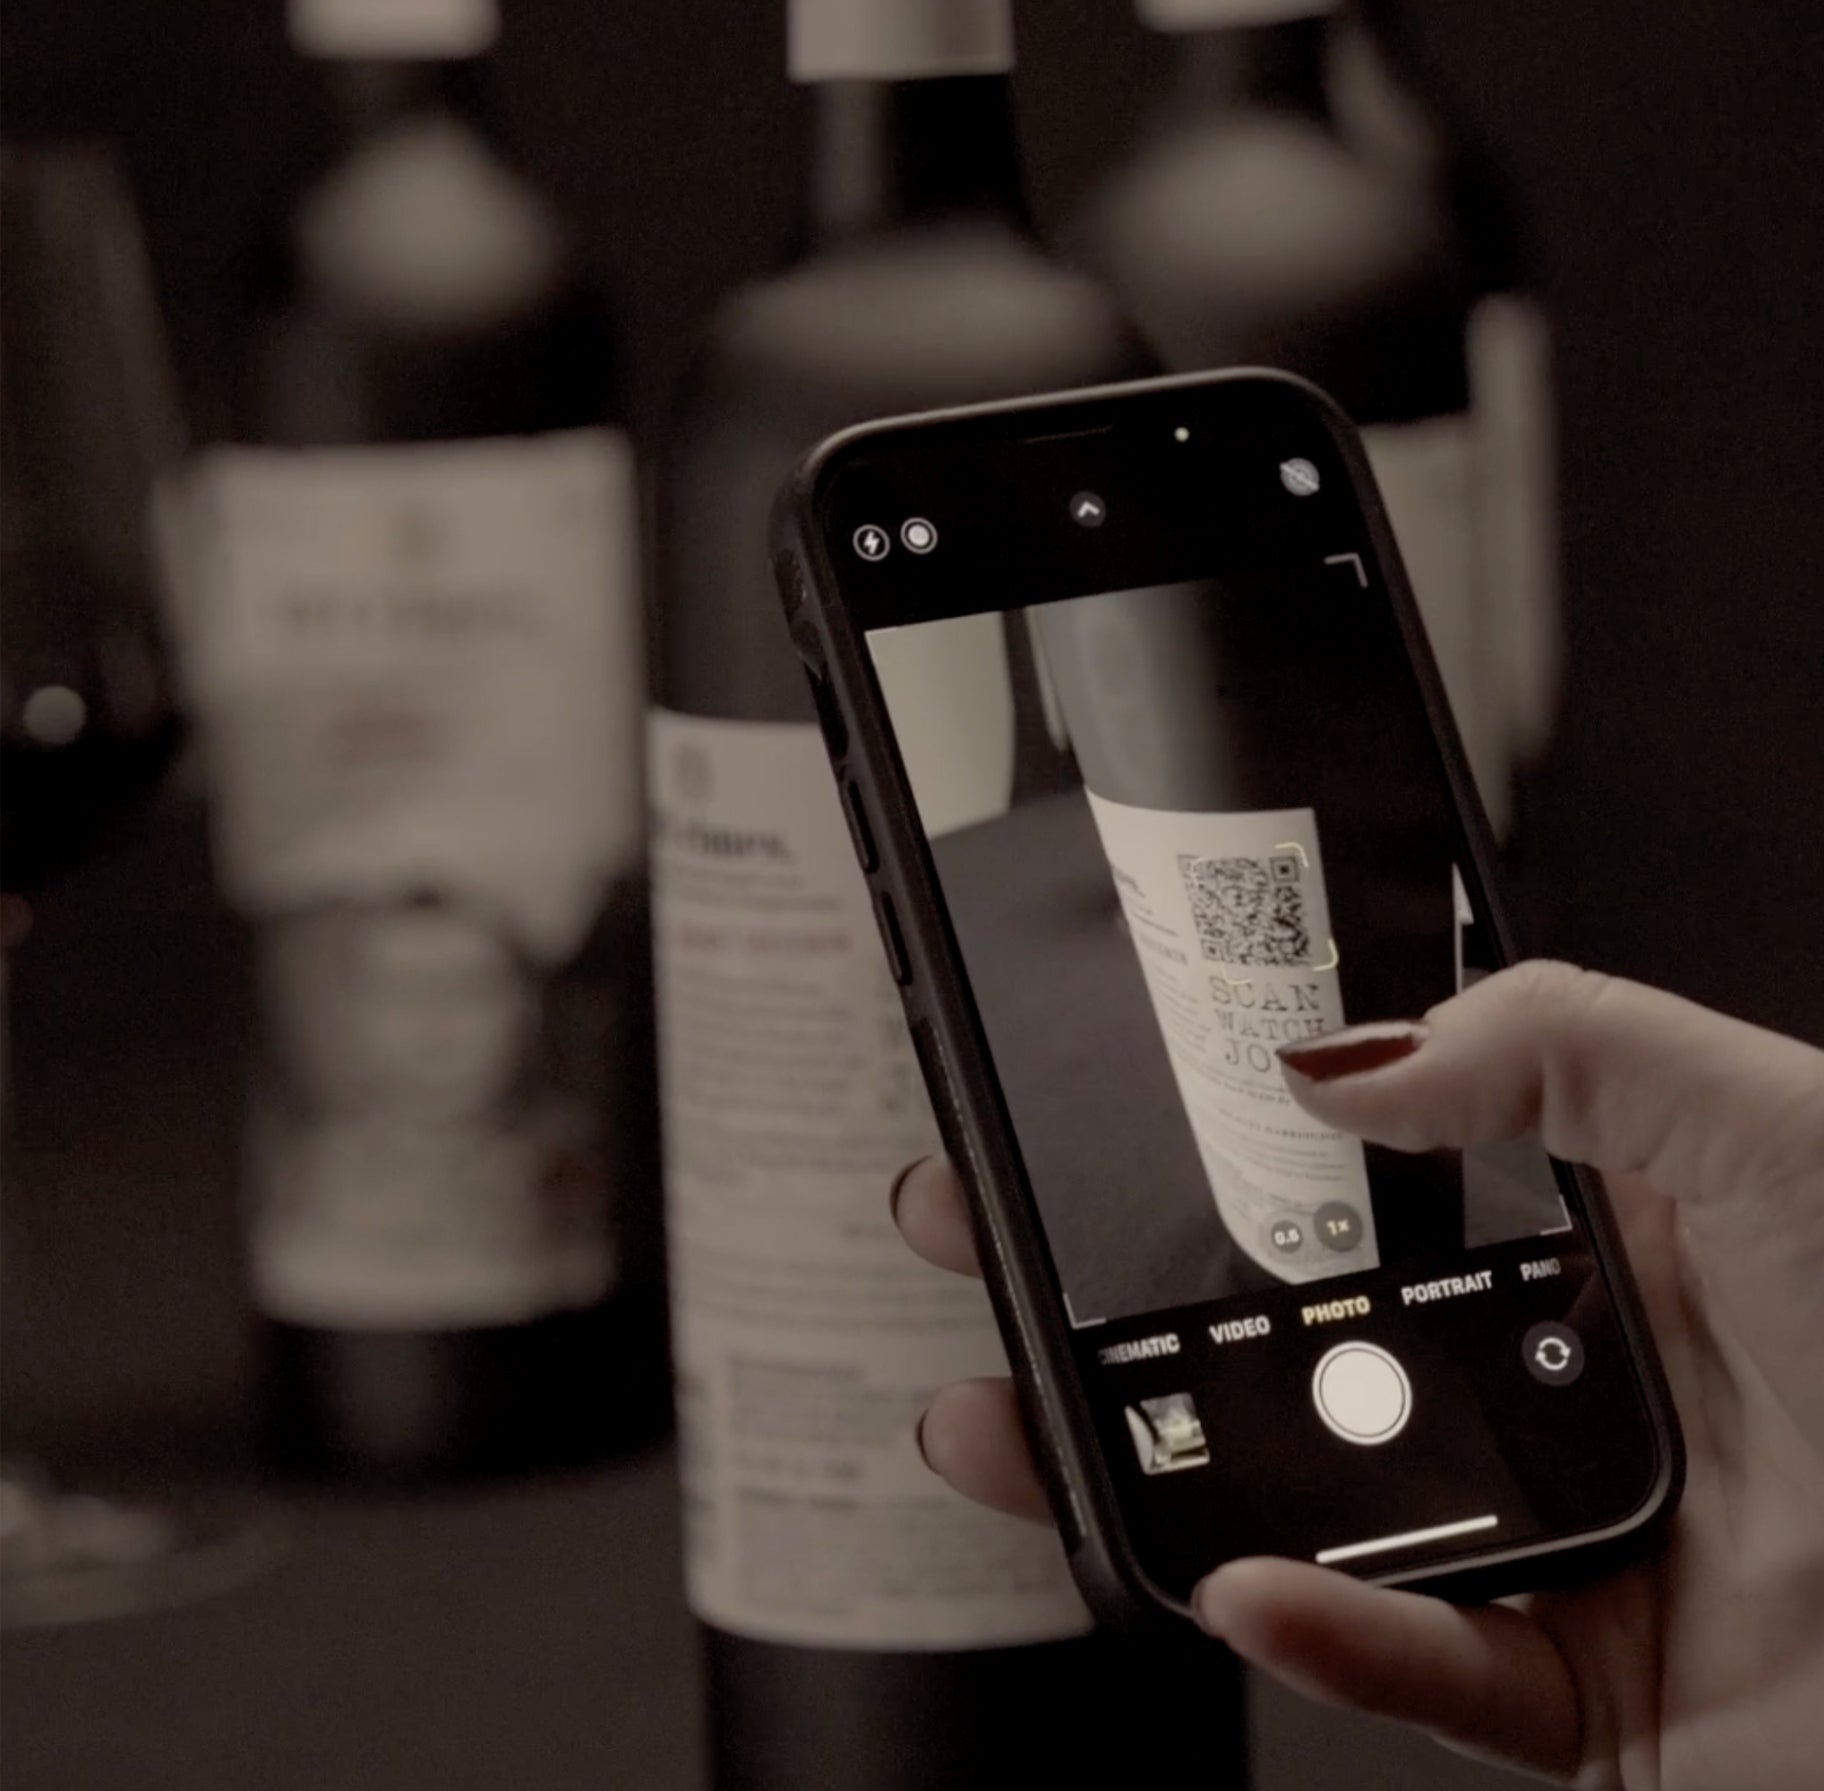 Screenshot of "How to" video. A hand holding a phone in camera mode scanning a QR code